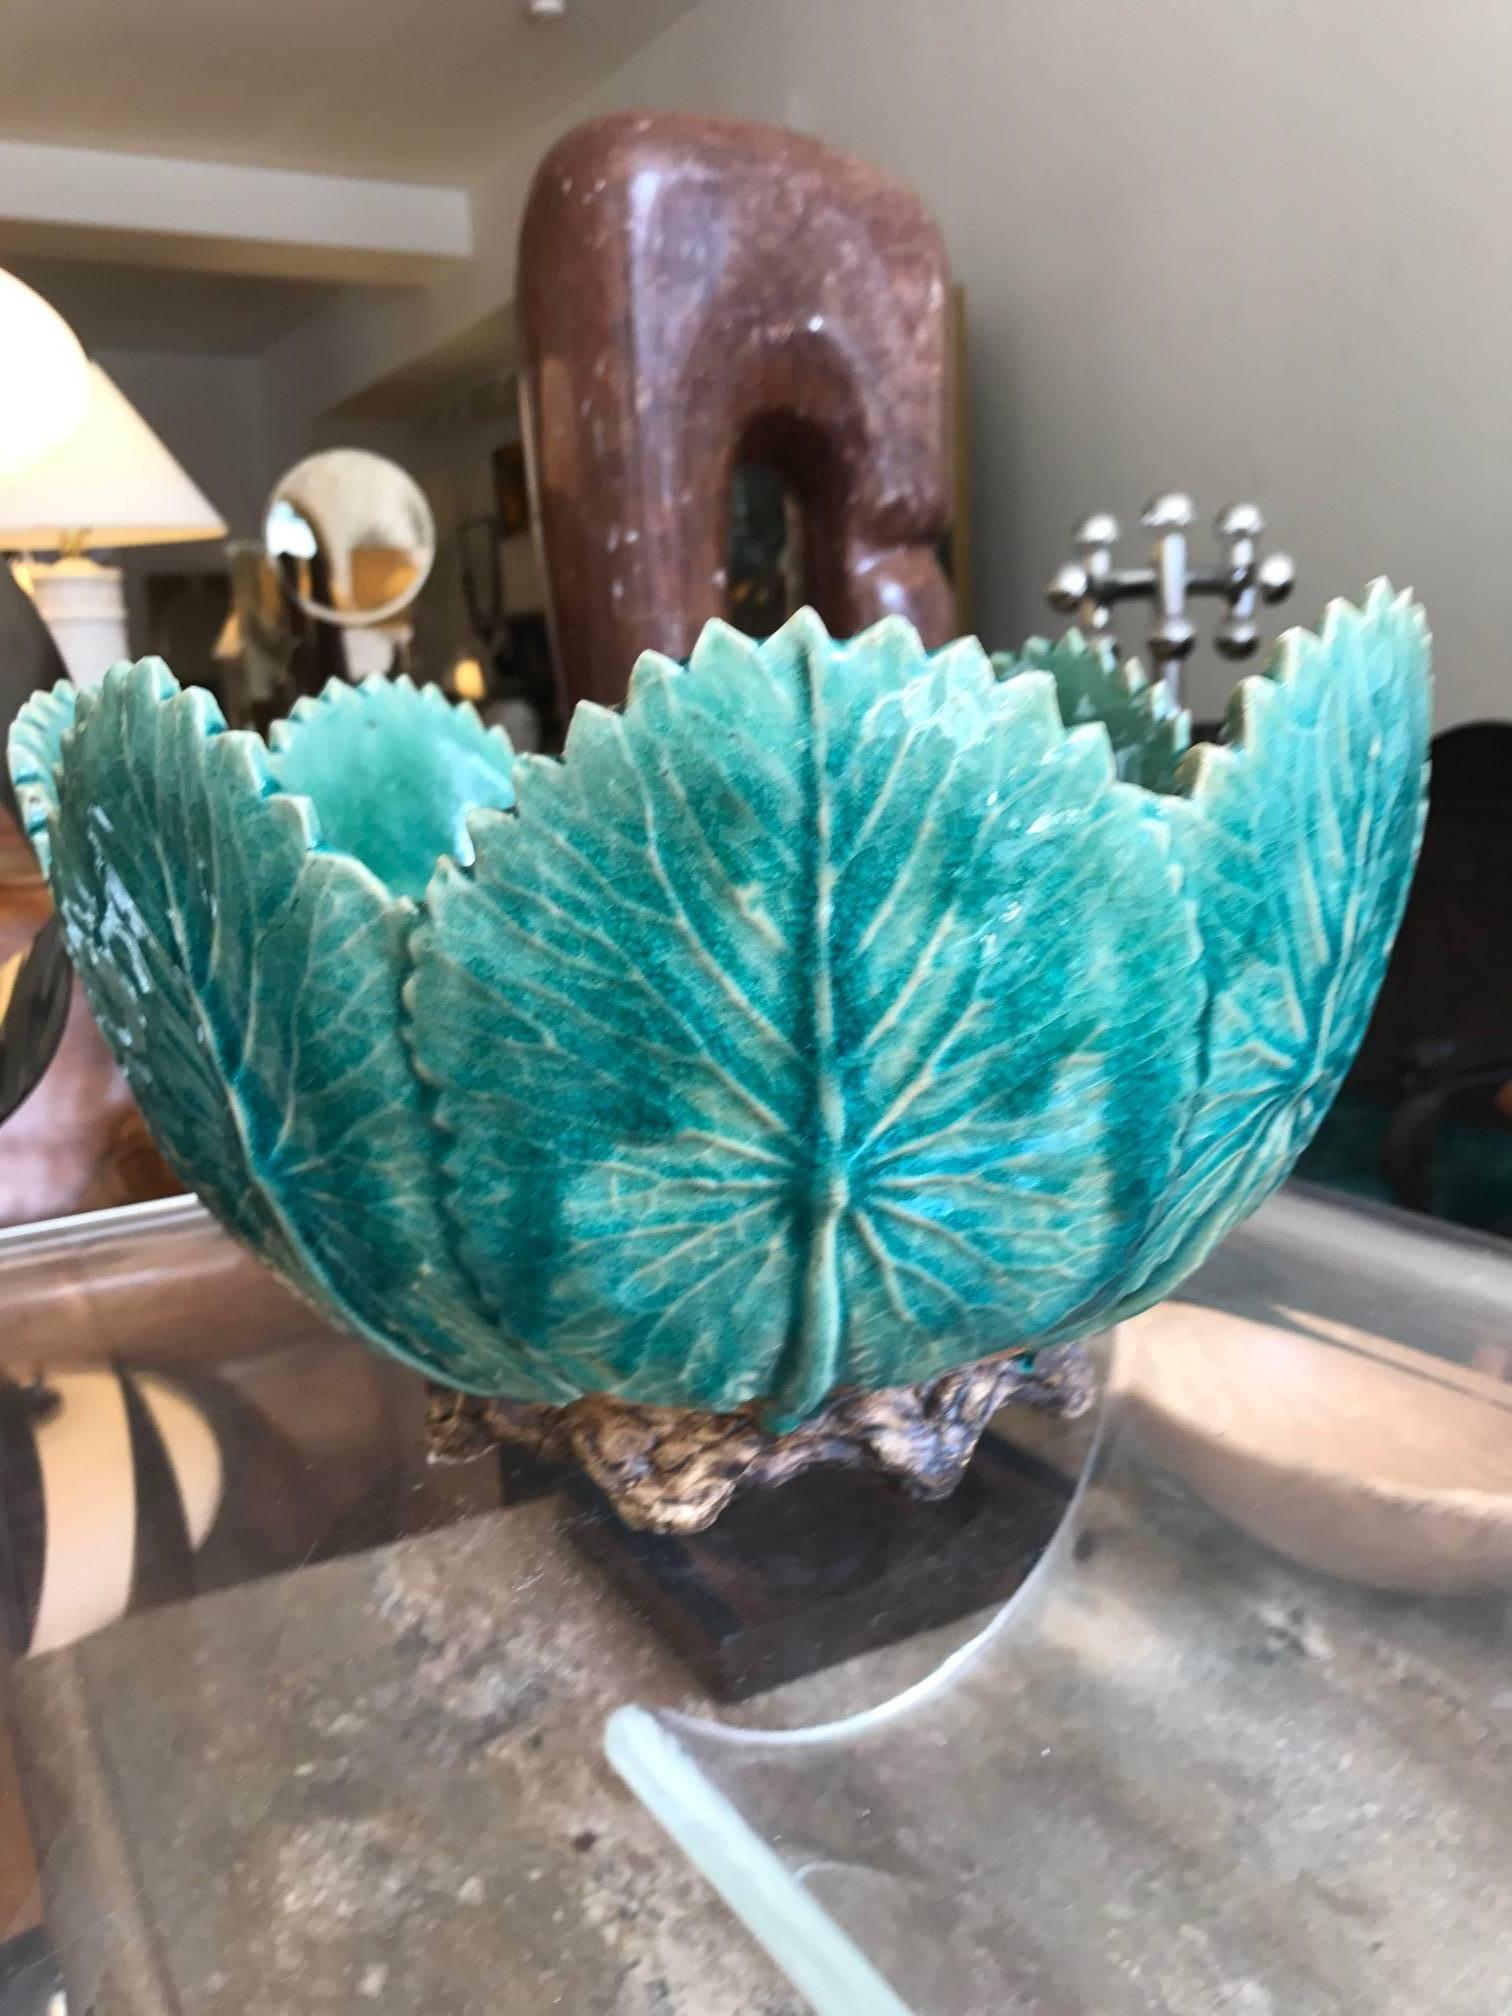 A large-scale 19th century Majolica ceramic centrepiece bowl. The bowl features upright cabbage leaves. Striking decorative glazed ceramic object.